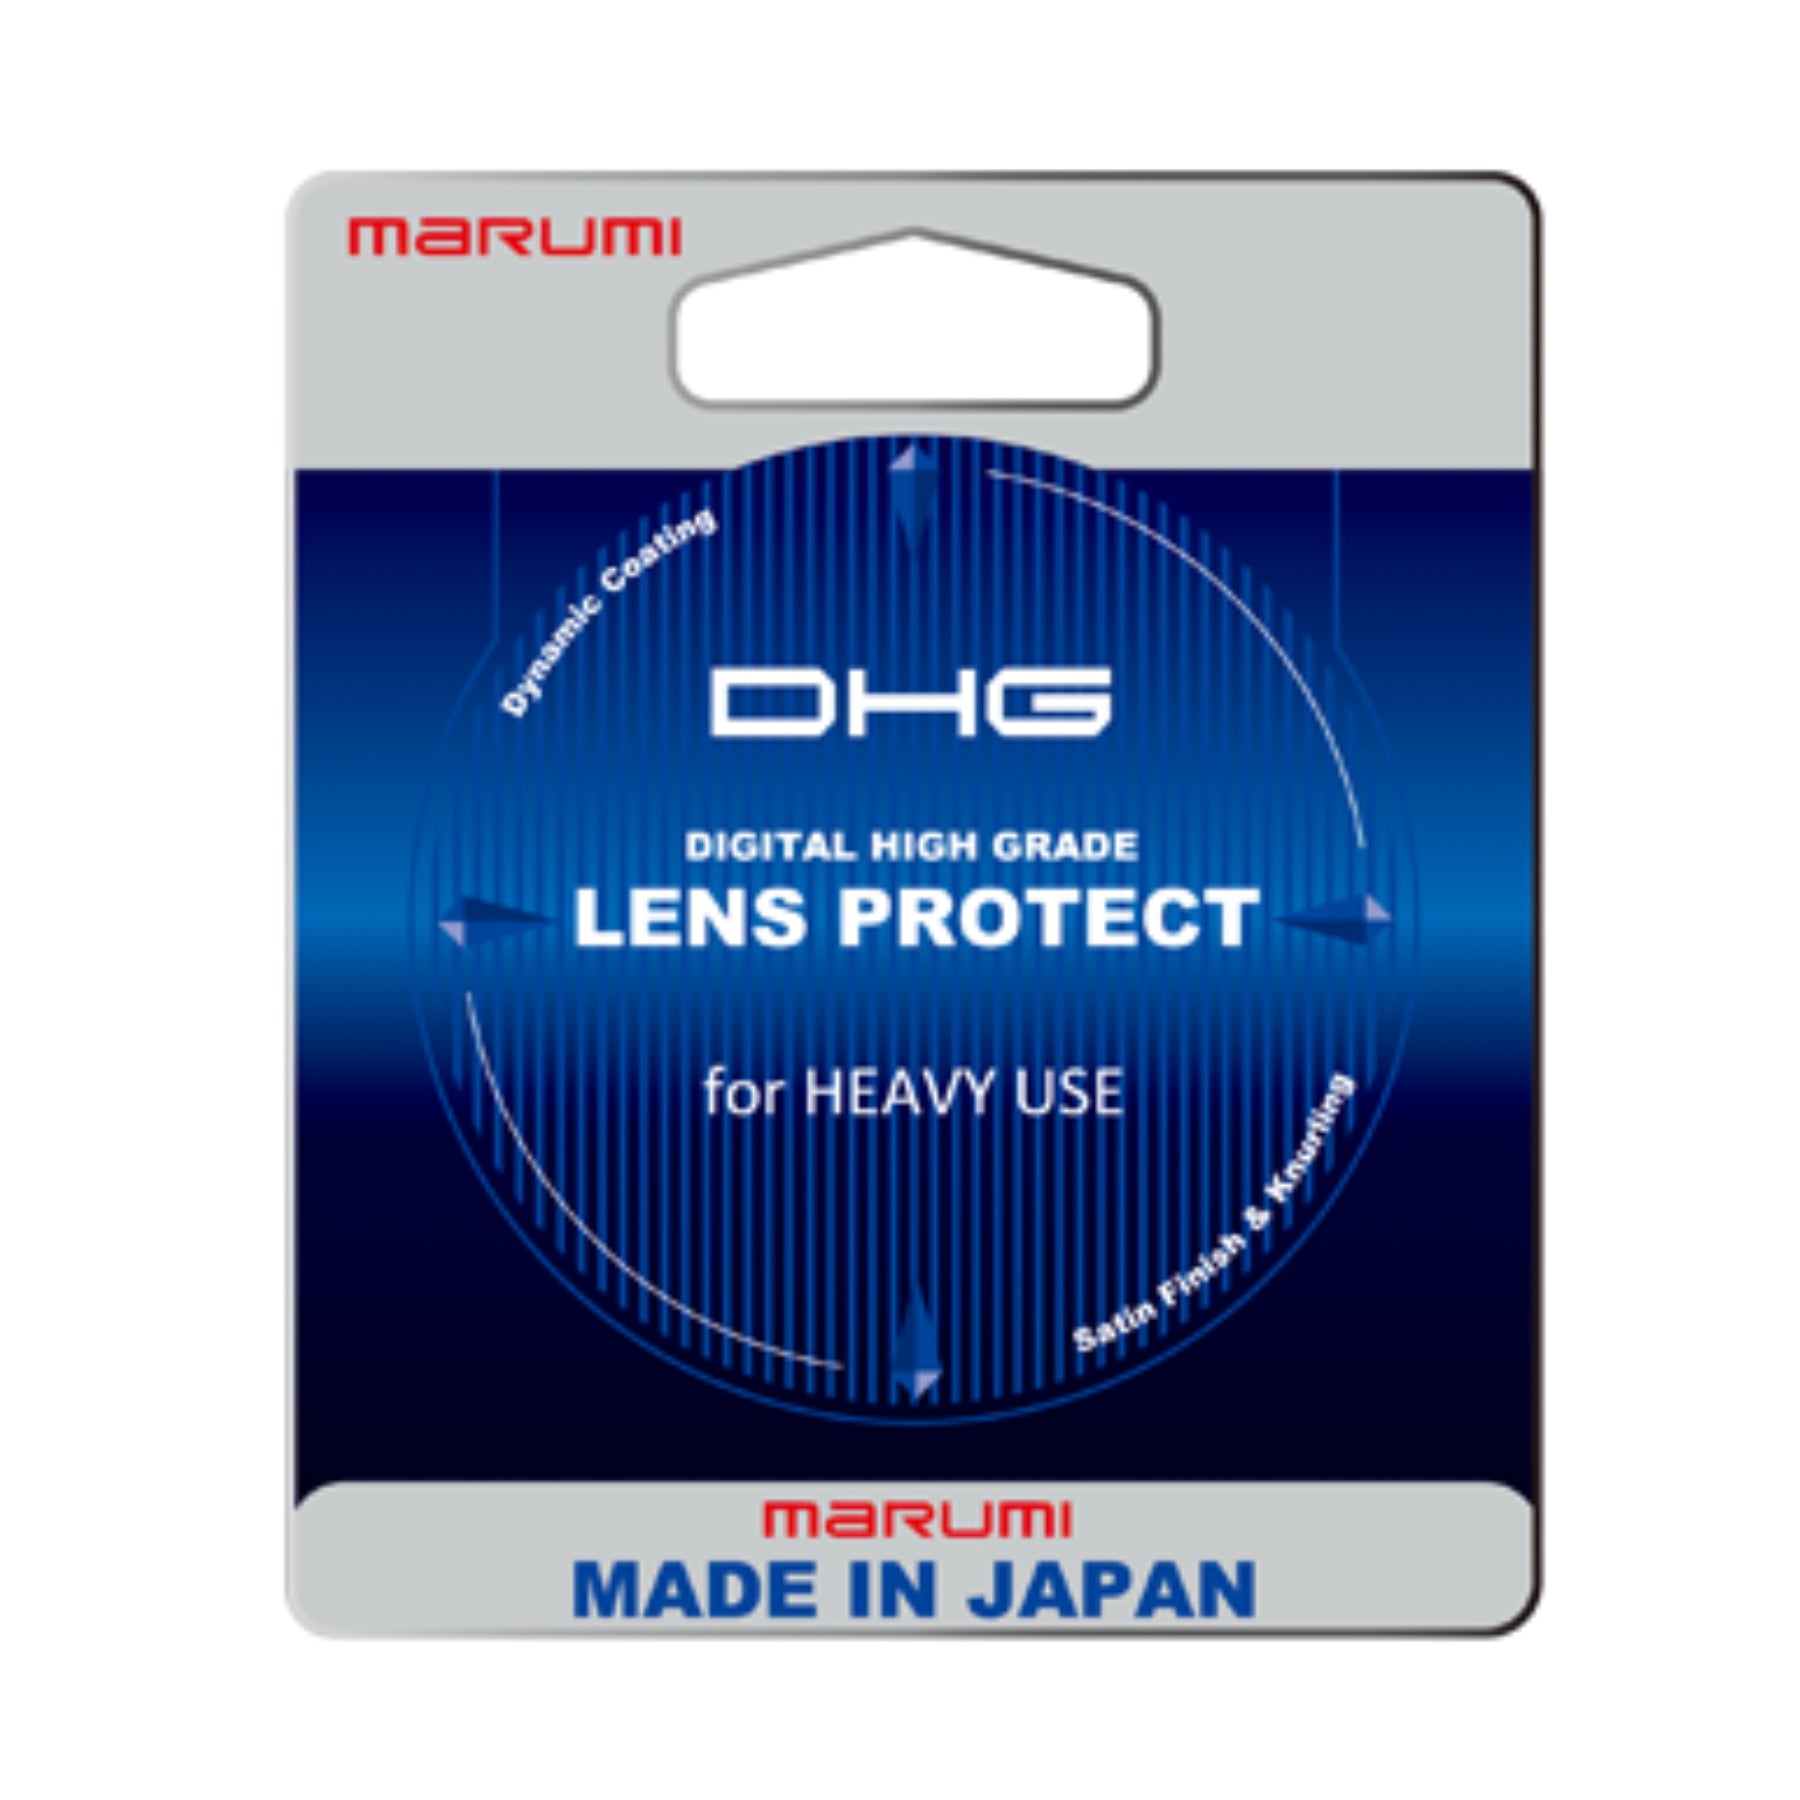 Buy Marumi Dhg Lens Protect Filter | Topic Store